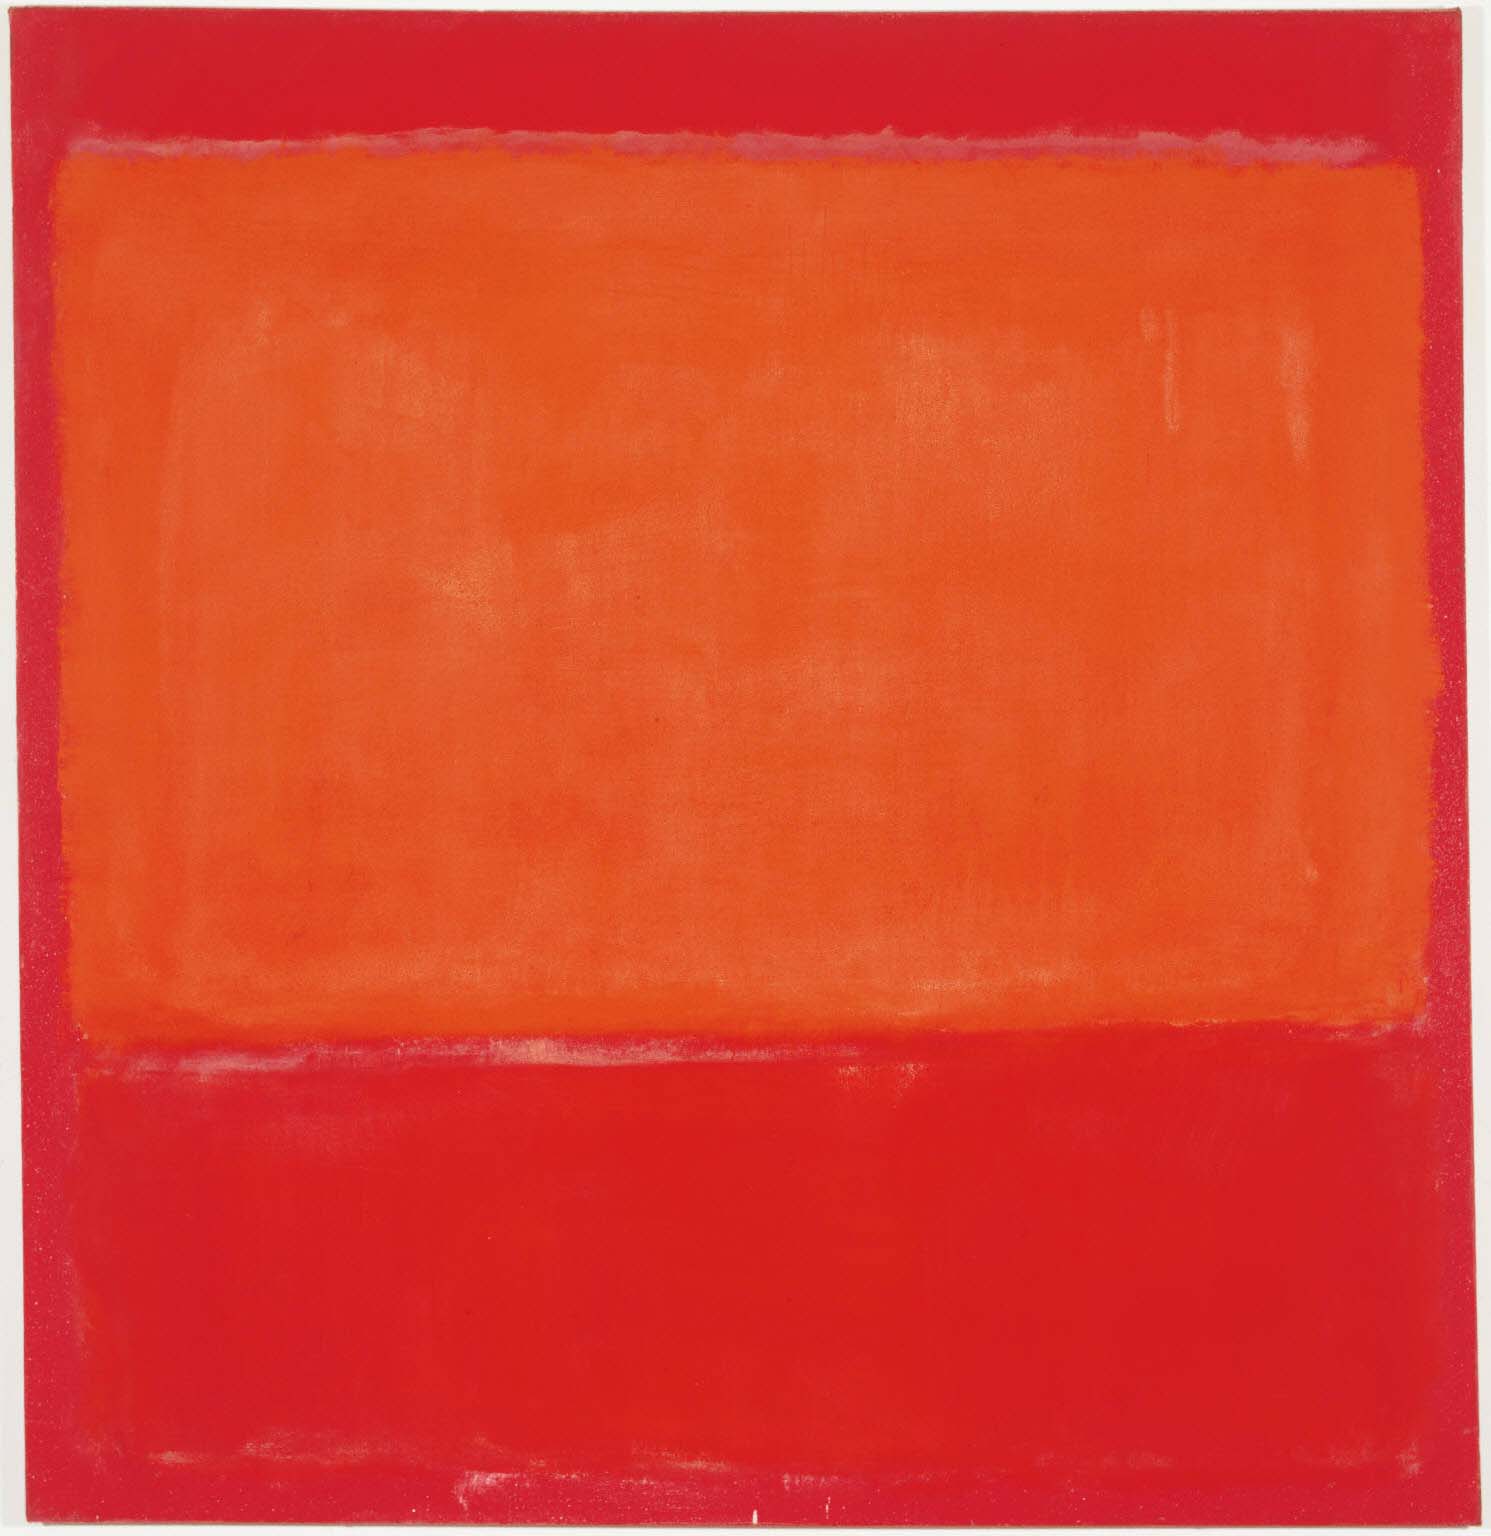 Orange and Red on | The Phillips Collection